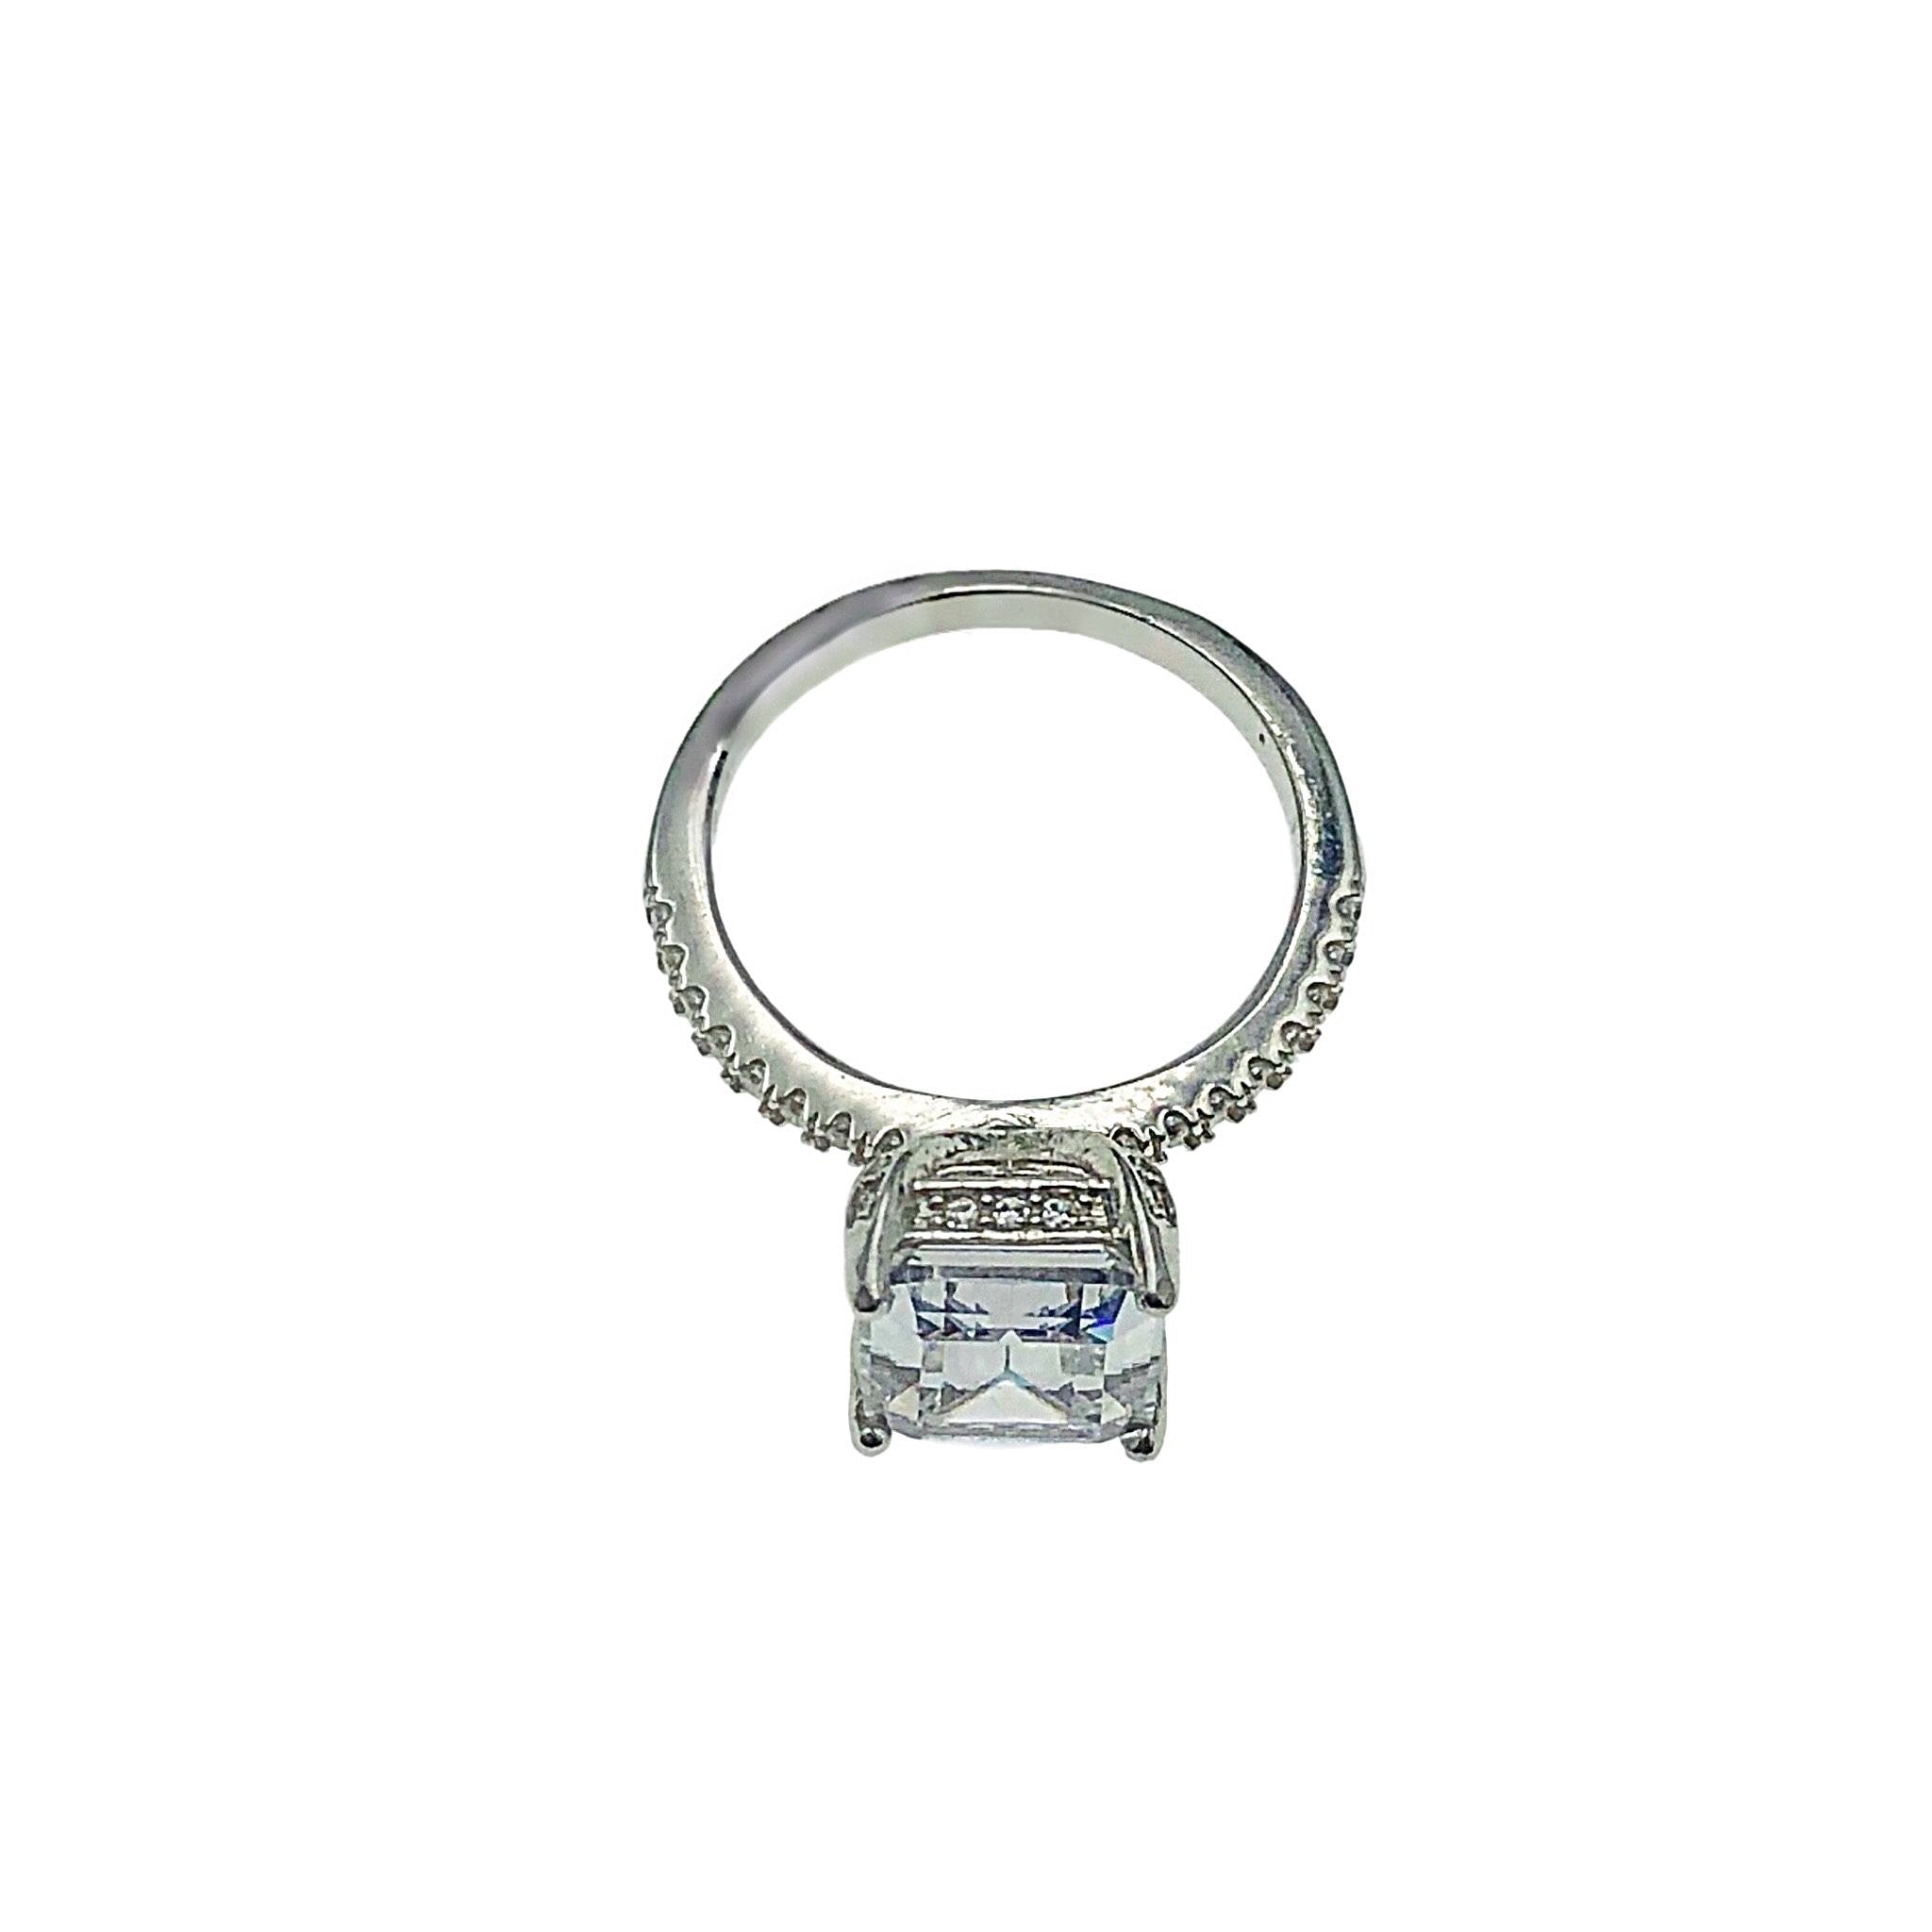 Emerald cut solitaire ring full view